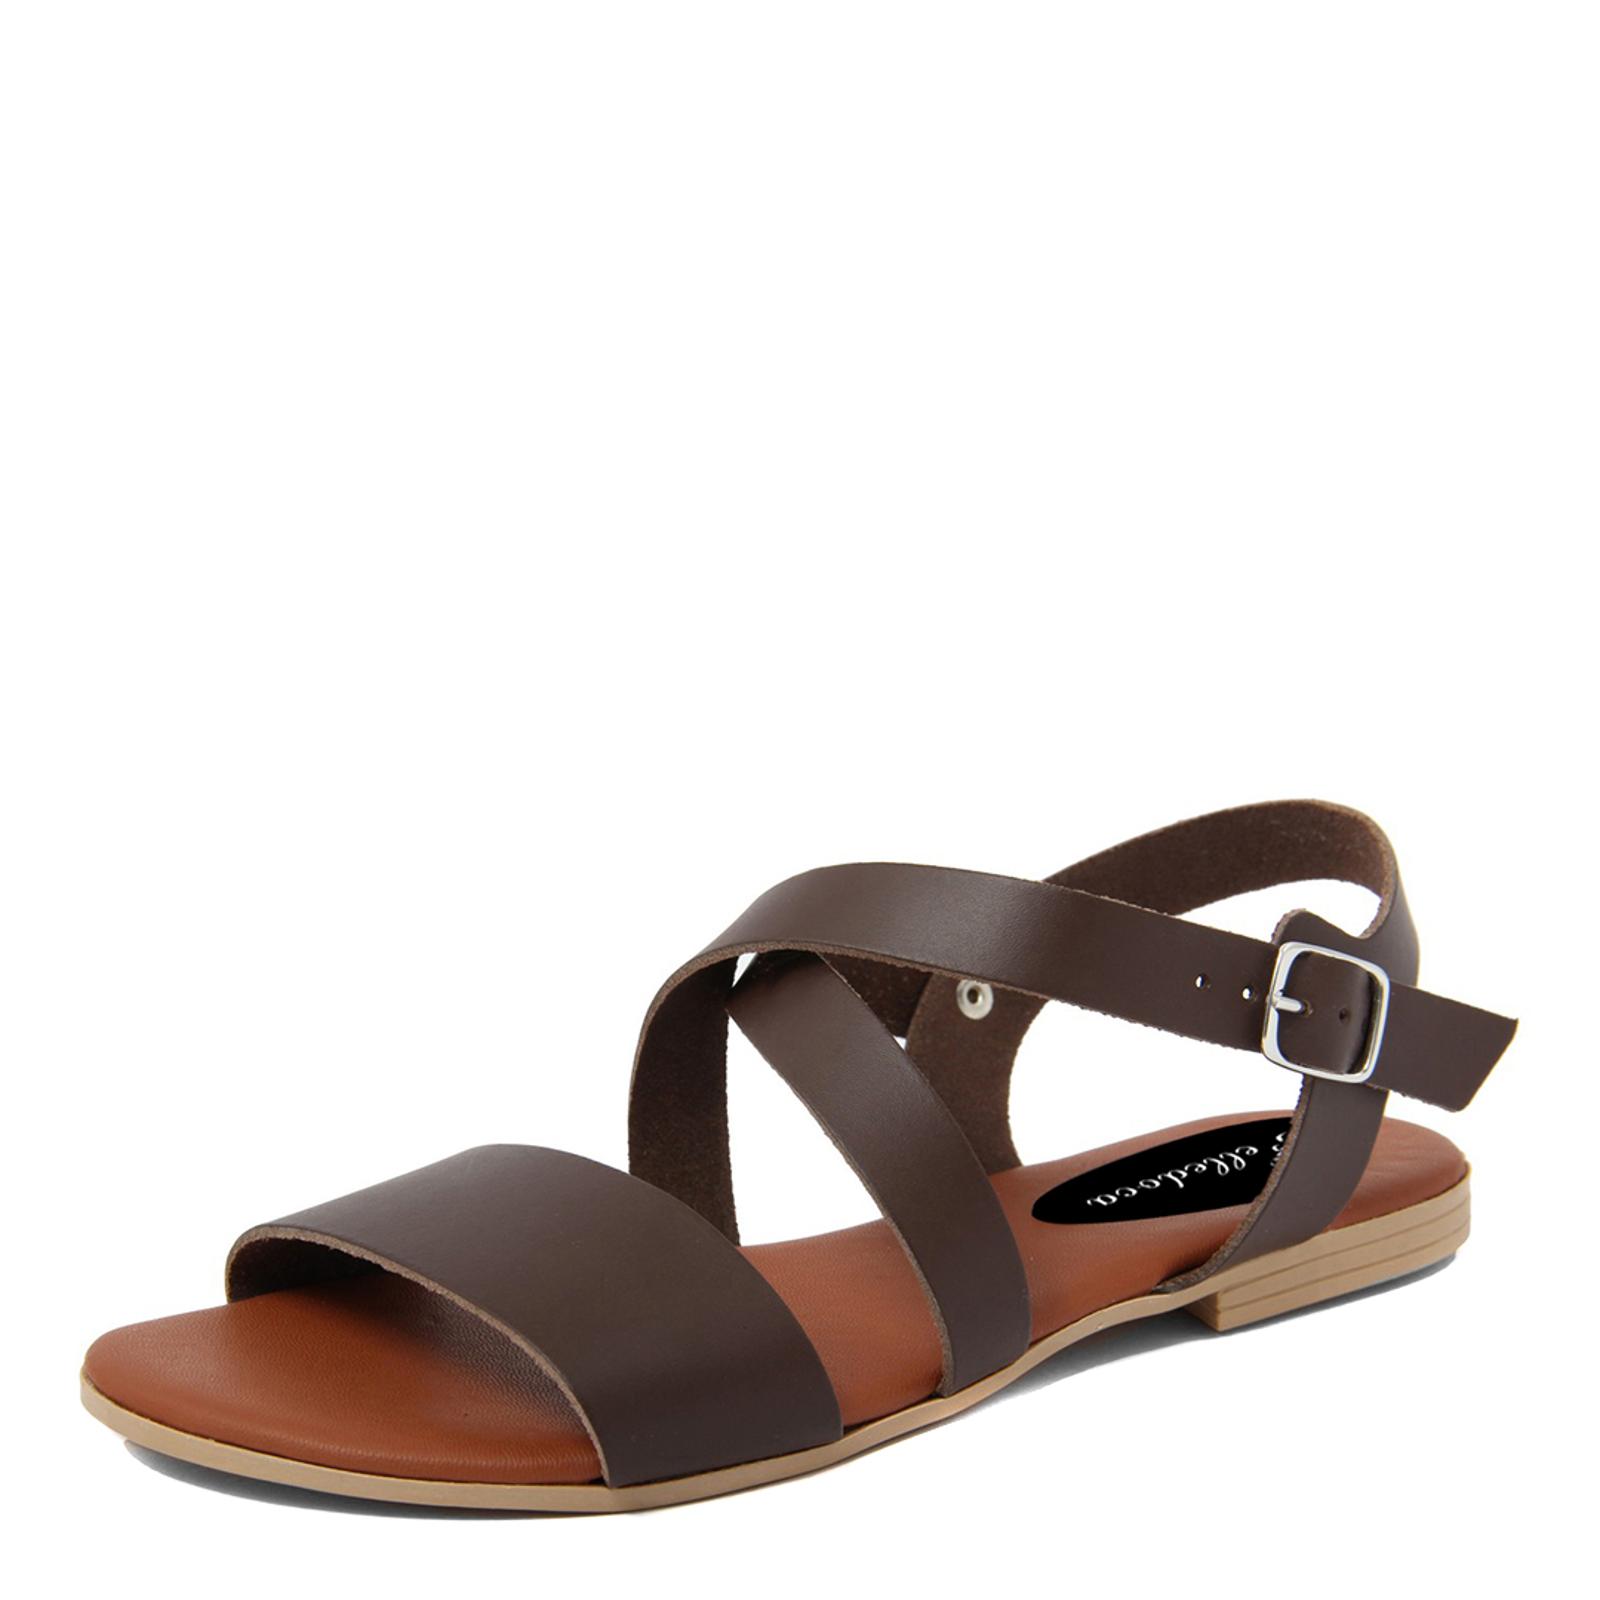 Brown Leather Strappy Sandals - BrandAlley